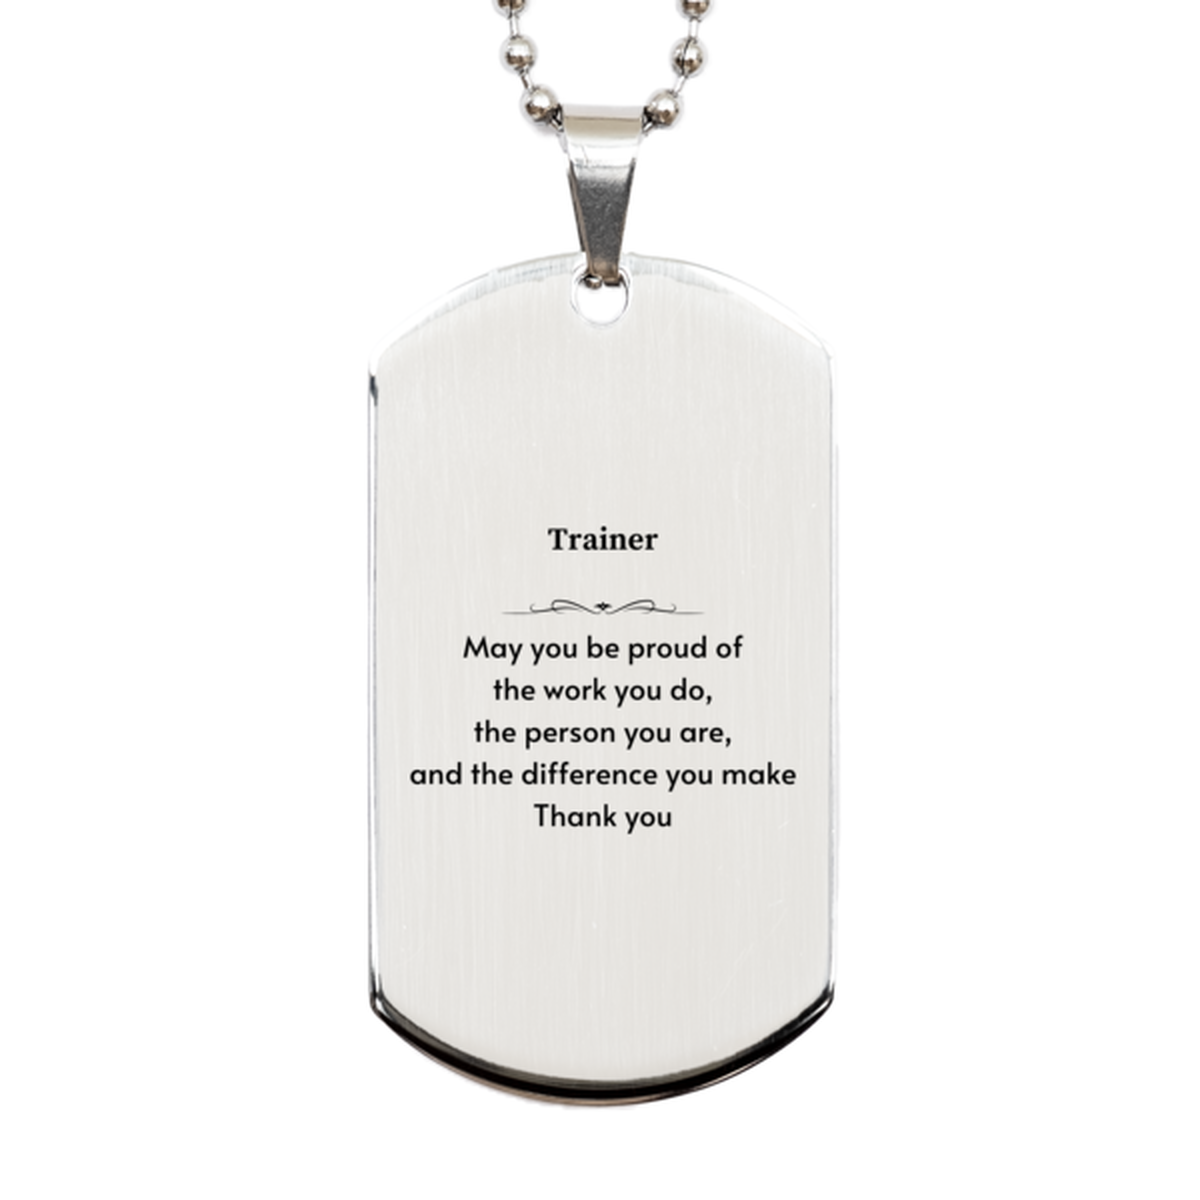 Heartwarming Silver Dog Tag Retirement Coworkers Gifts for Trainer, Trainer May You be proud of the work you do, the person you are Gifts for Boss Men Women Friends